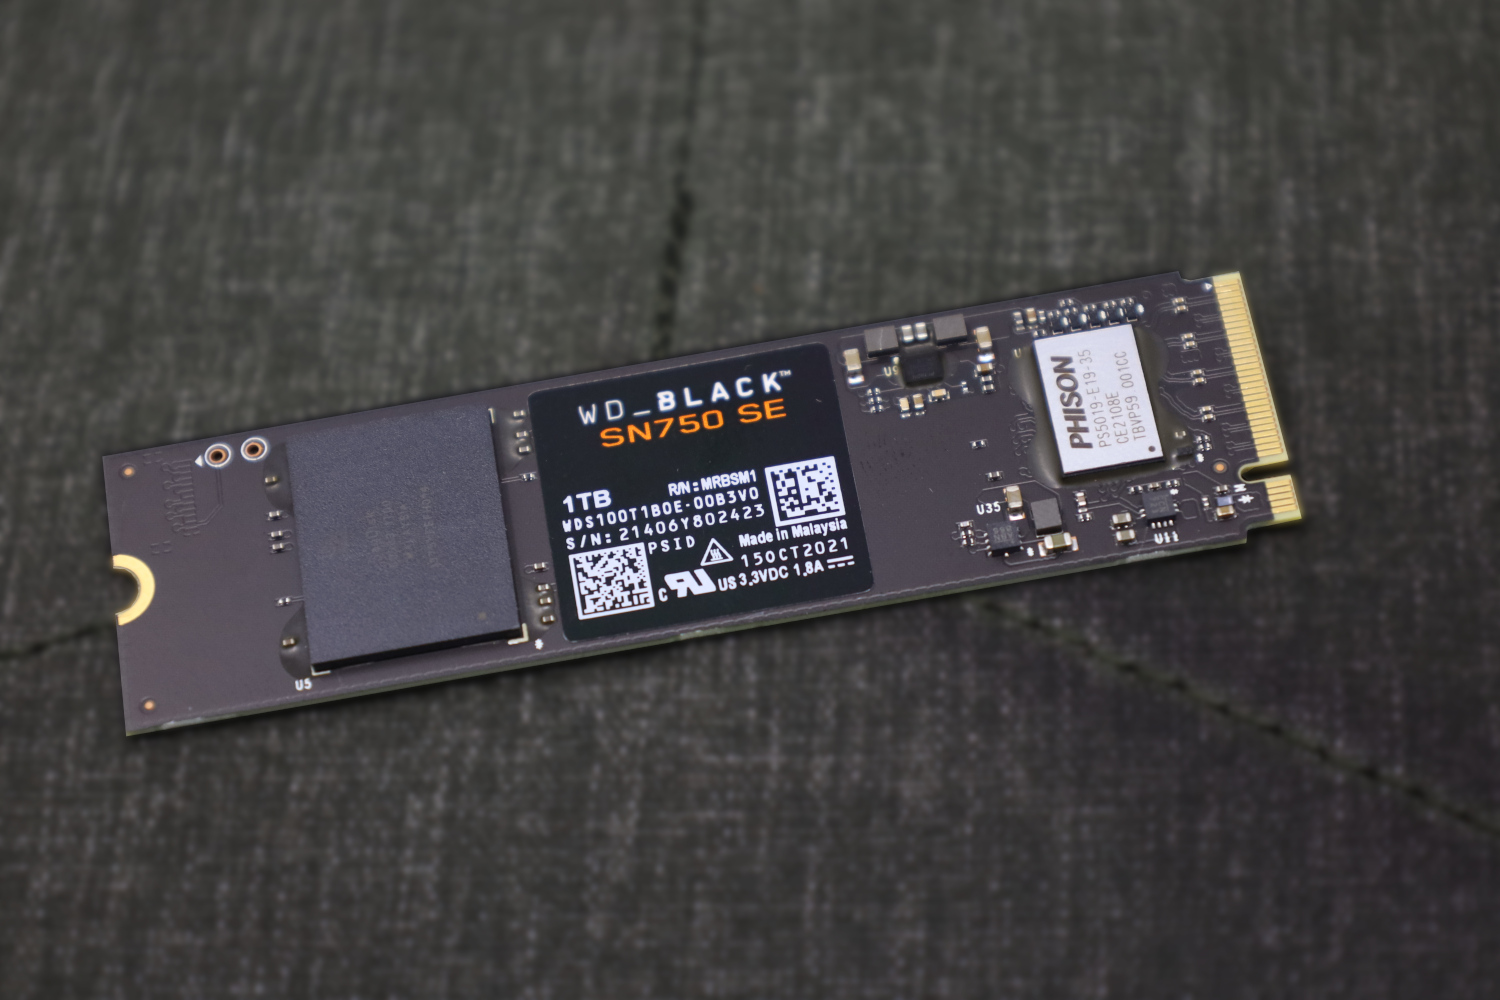 WD Blue SSD 250 GB Review : WD is back in the SSD game